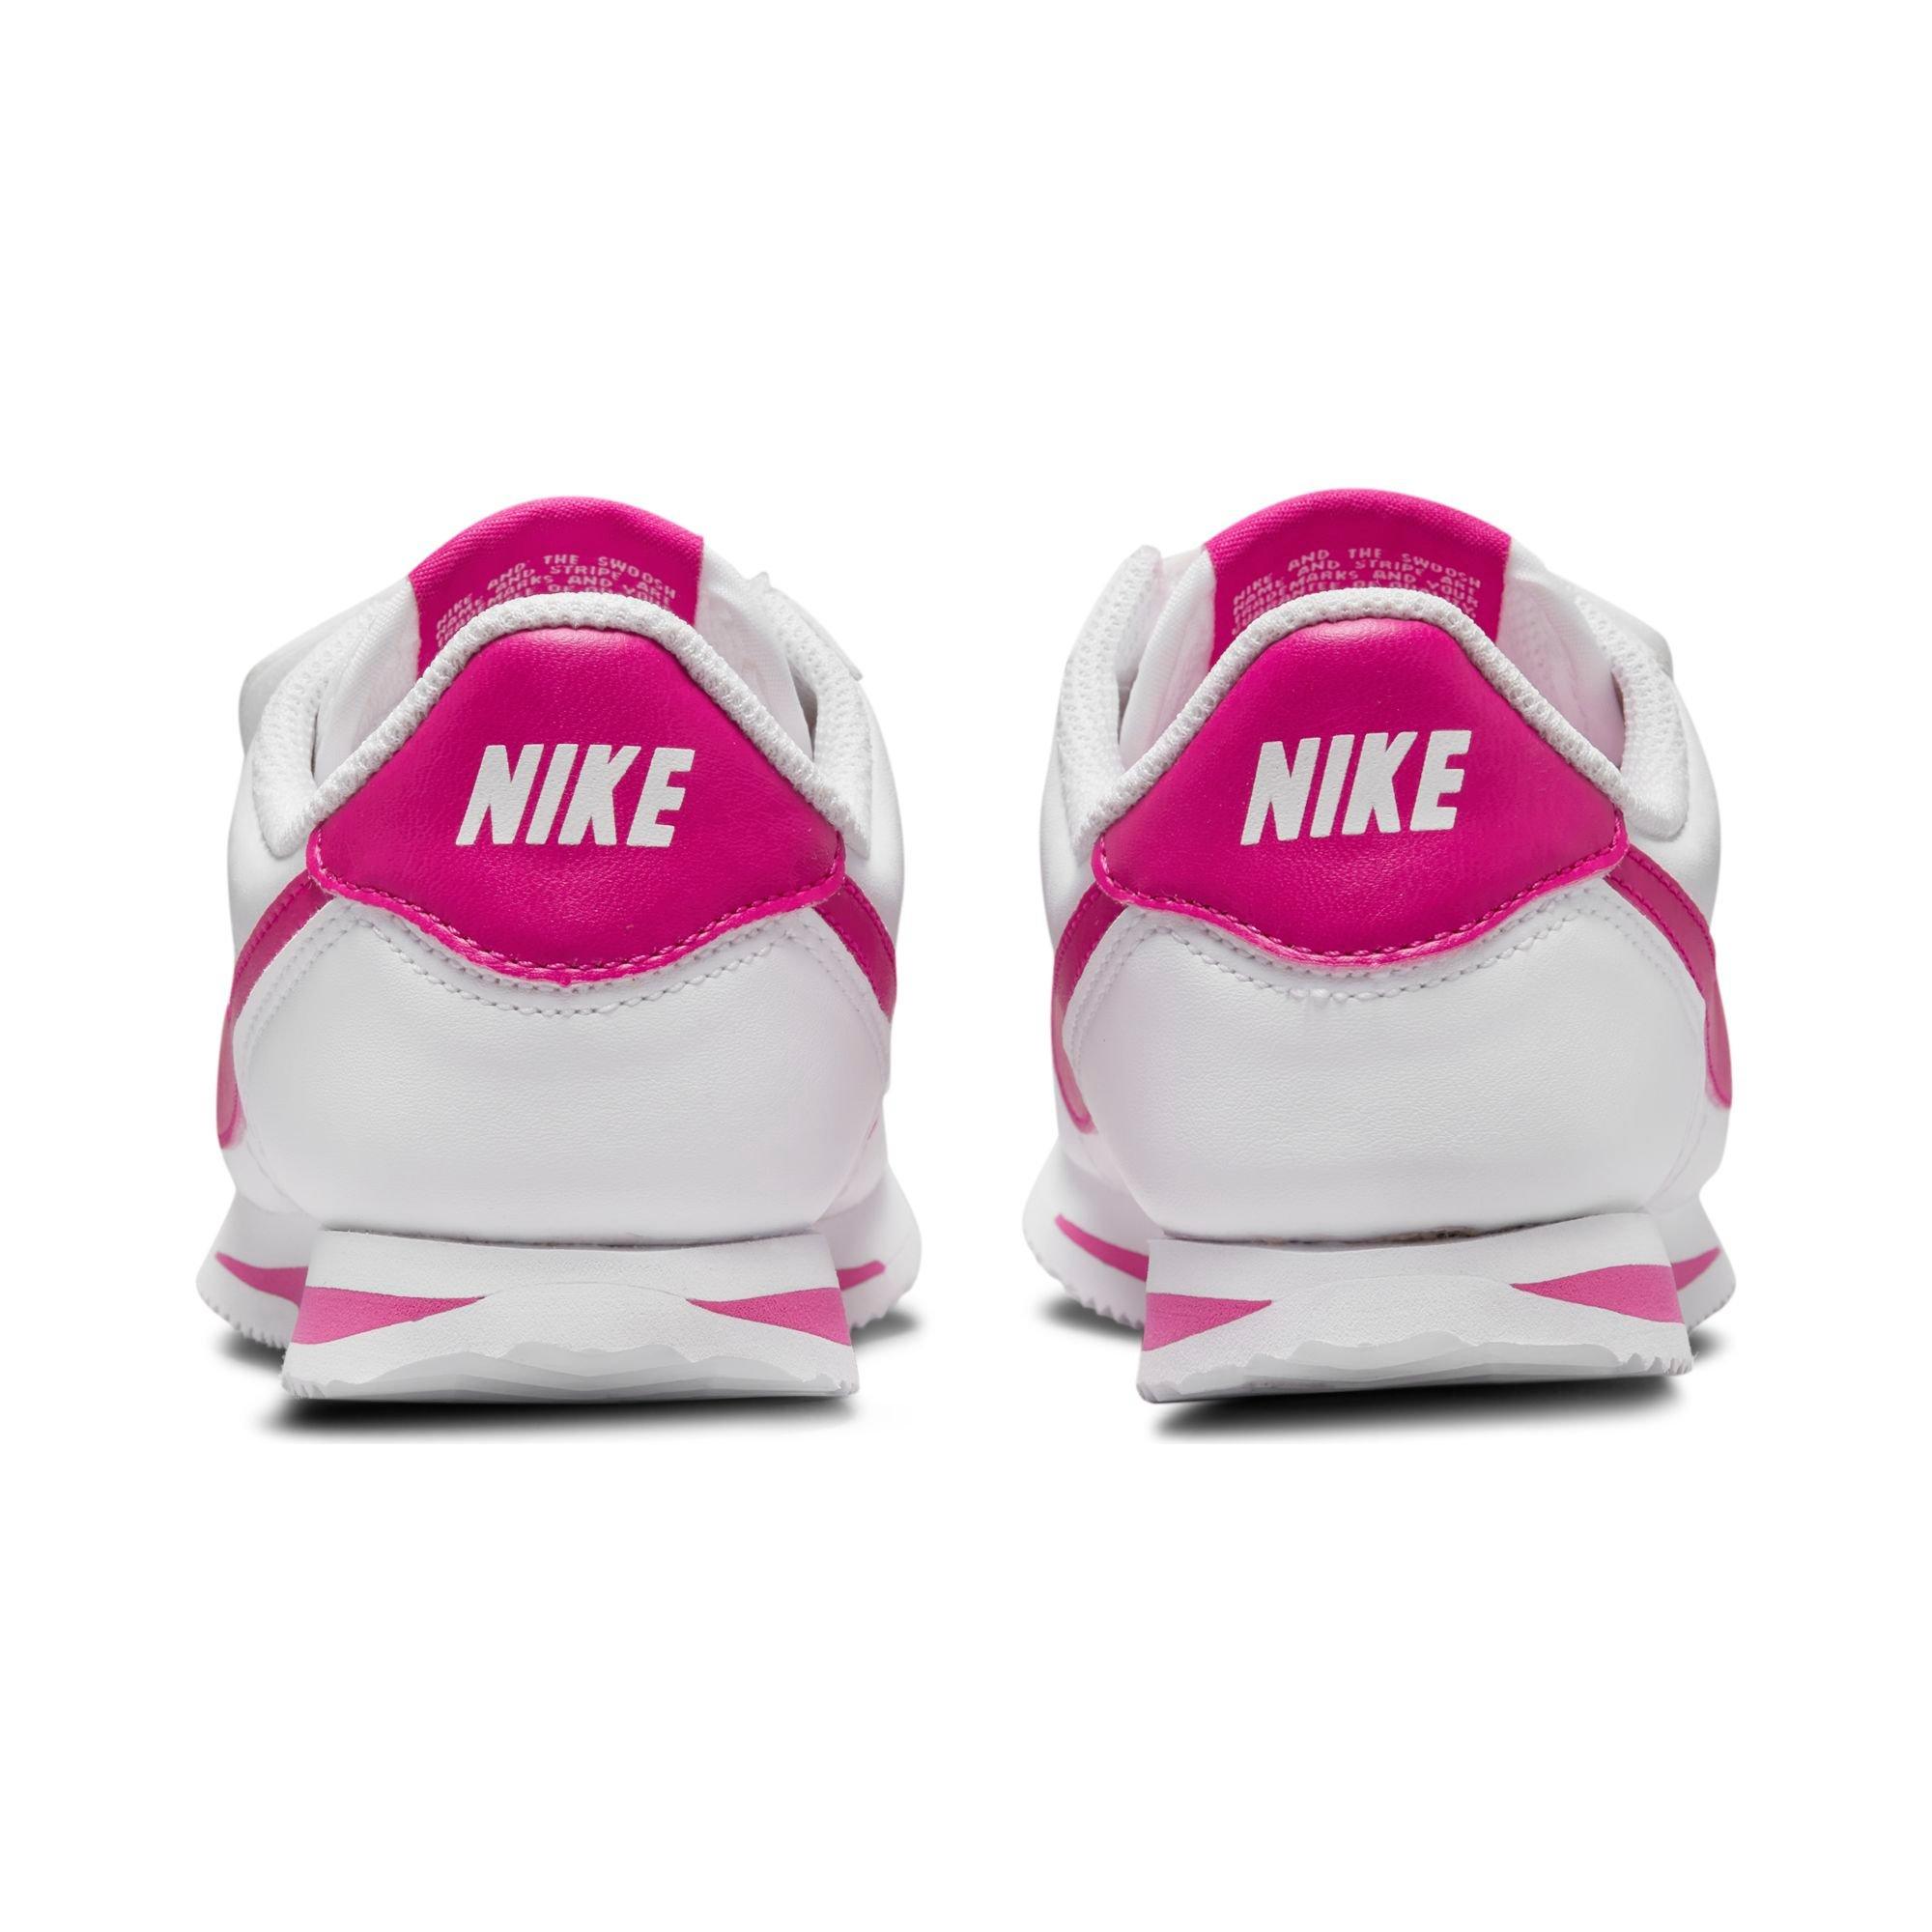 Nike Cortez Leather Jogging Shoes - White & Pink - Candy Drip Kush